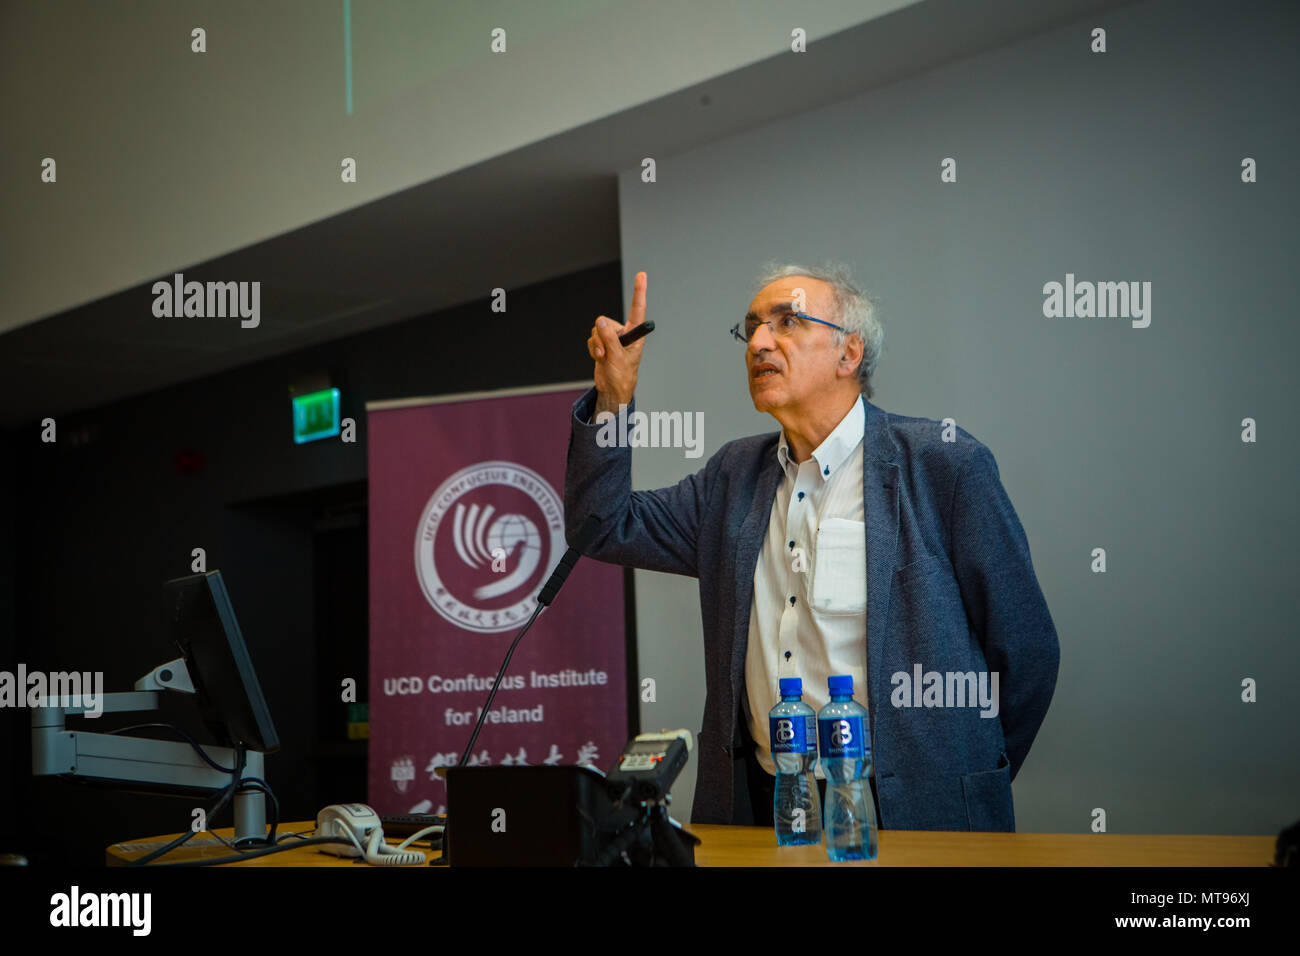 Dublin. 29th May, 2018. Joel Bellassen, a famous French sinologist and the vice president of the International Society for Chinese Language Teaching, delievers a lecture on Chinese teaching in Dublin, Ireland, May 28, 2018. A public lecture on international Chinese teaching, organized by the University College Dublin (UCD) Confucius Institute for Ireland, was held here at UCD on Monday night, attracting nearly 200 participants including foreign language teachers from over 60 Irish high schools. Credit: Xinhua/Alamy Live News Stock Photo